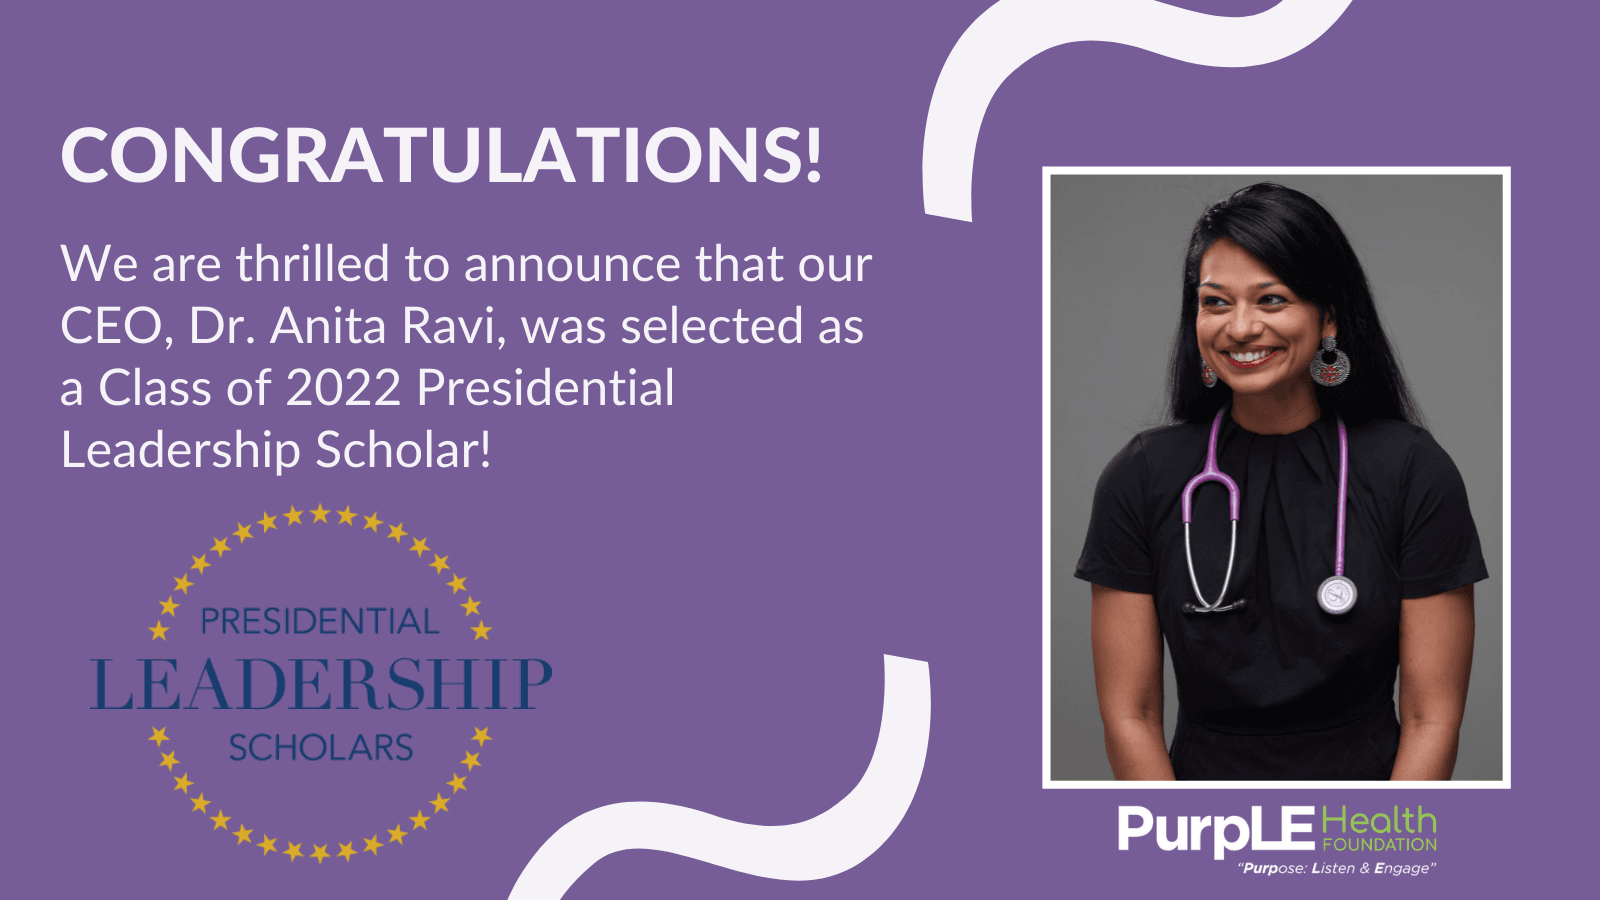 Congratulations to our CEO, Dr. Anita Ravi, for being selected to join the newest class of Presidential Leadership Scholars! The PLS program brings together bold and principled leaders who are committed to facing critical challenges around the world.